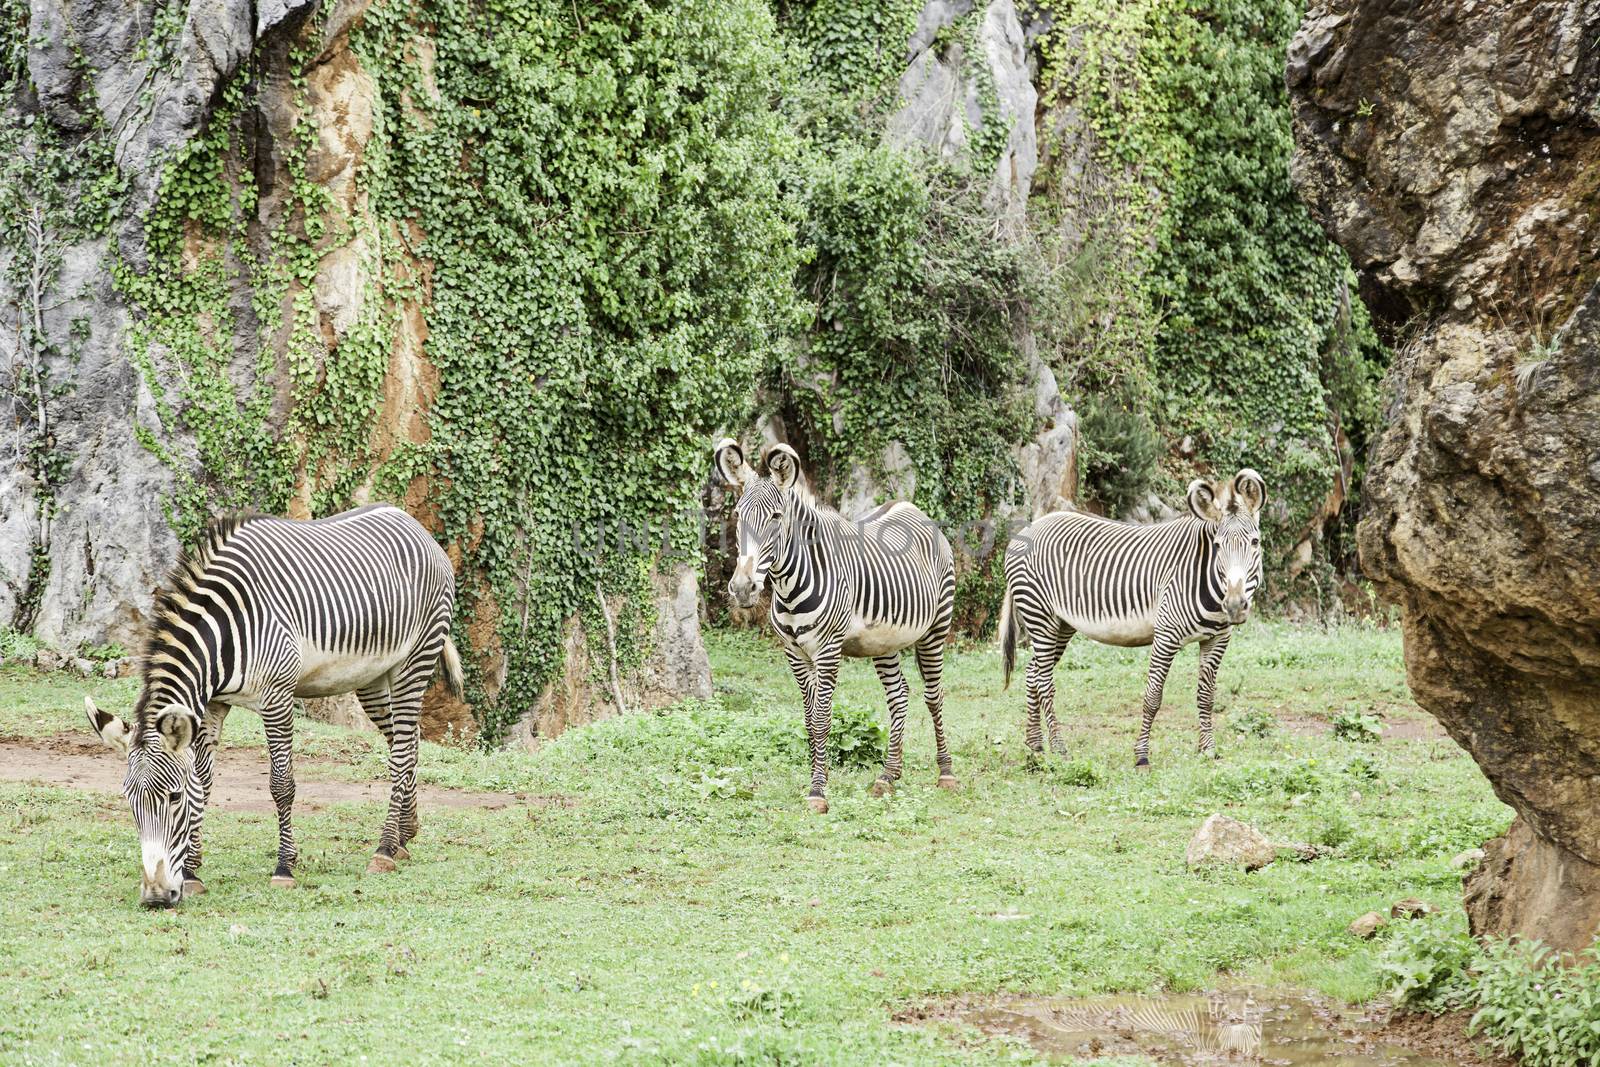 Wild zebras in nature, detail of a mammal.